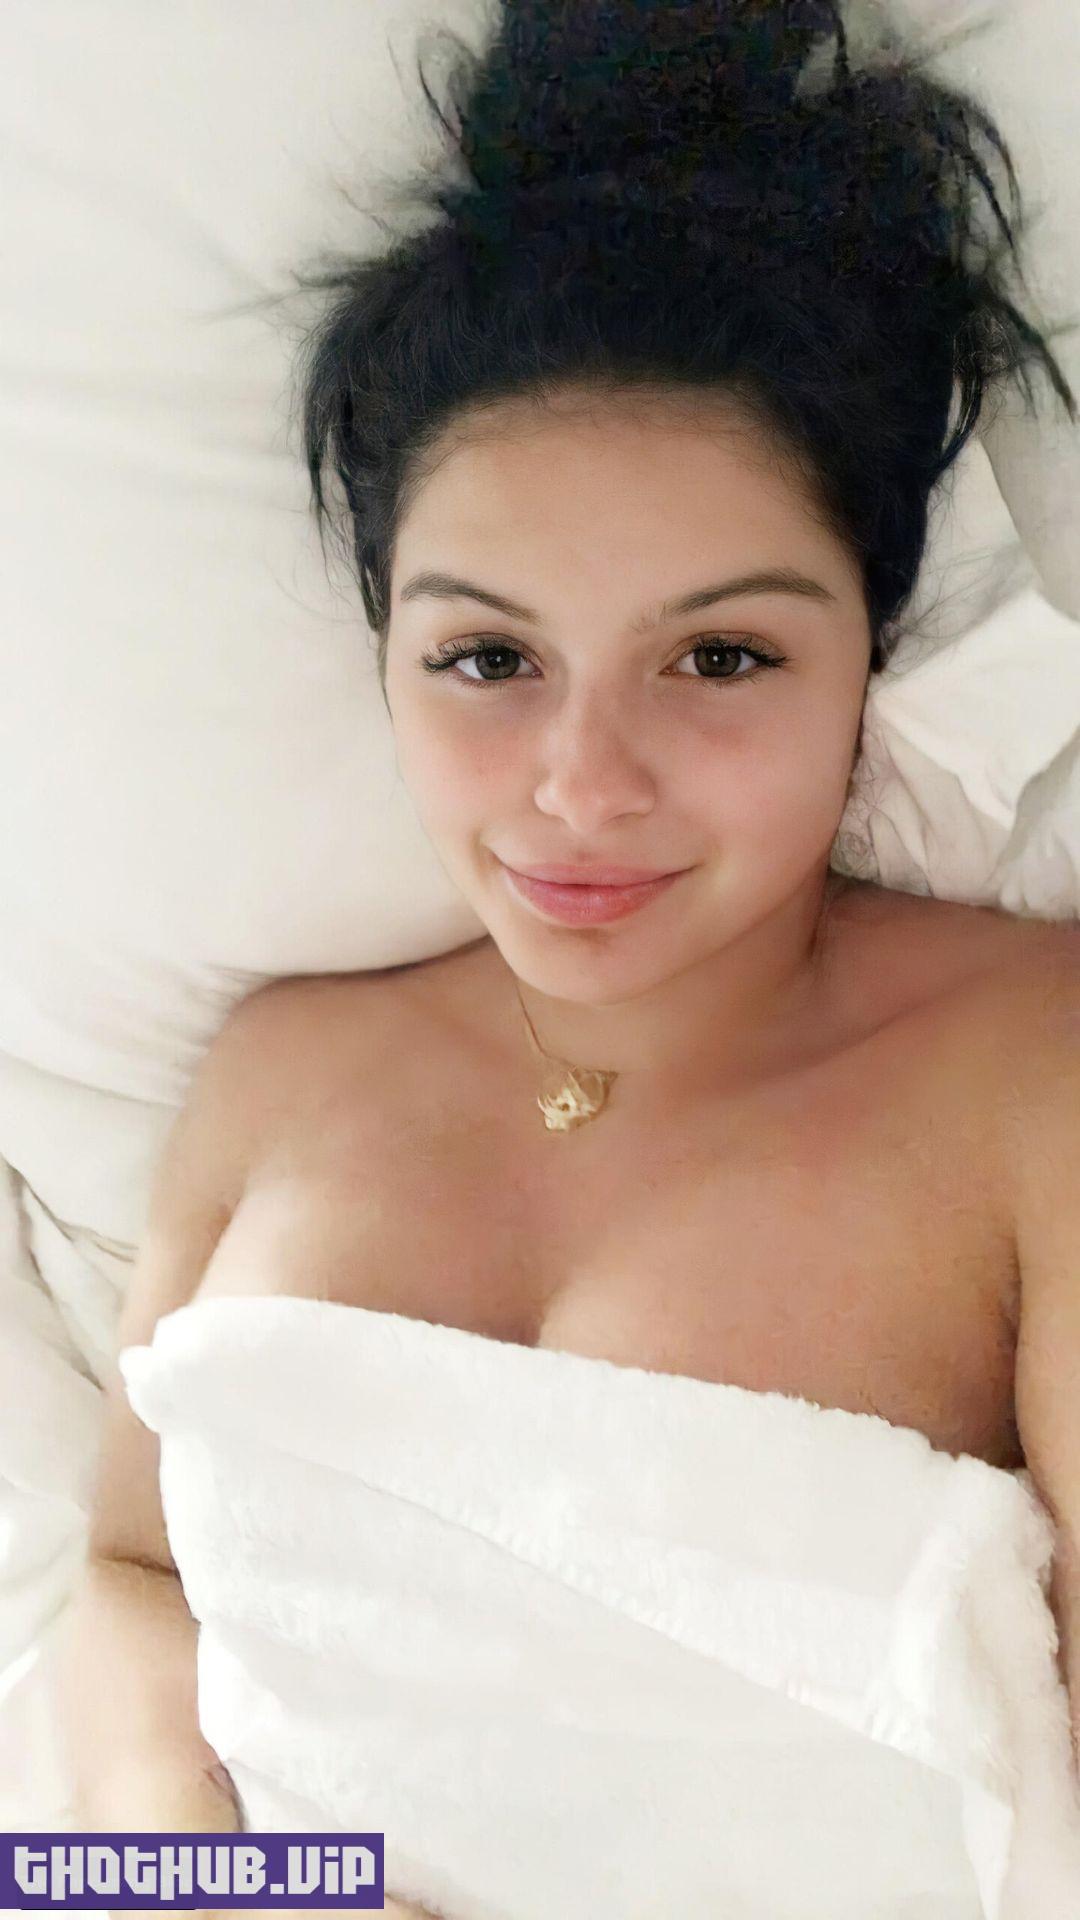 Ariel Winter Hot Selfie in Bed scaled 1 1 thefappeningblog.com